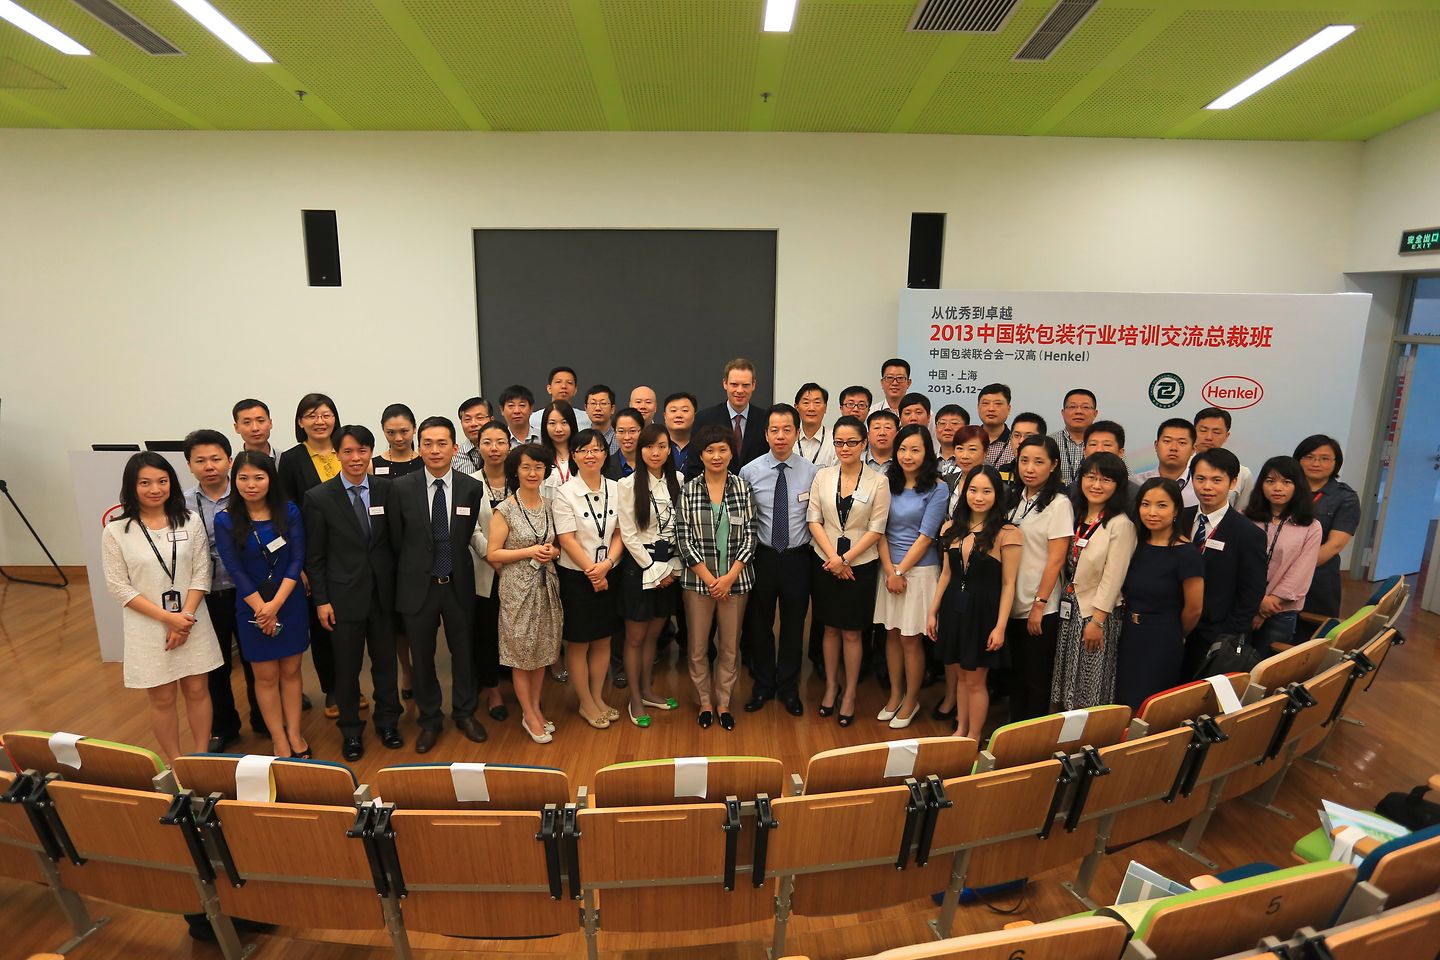 Henkel hosted the first training session for executives from the flexible packaging industry at the Packaging Executive Academy at the Henkel Asia Pacific Headquarters in Shanghai in June 2013.